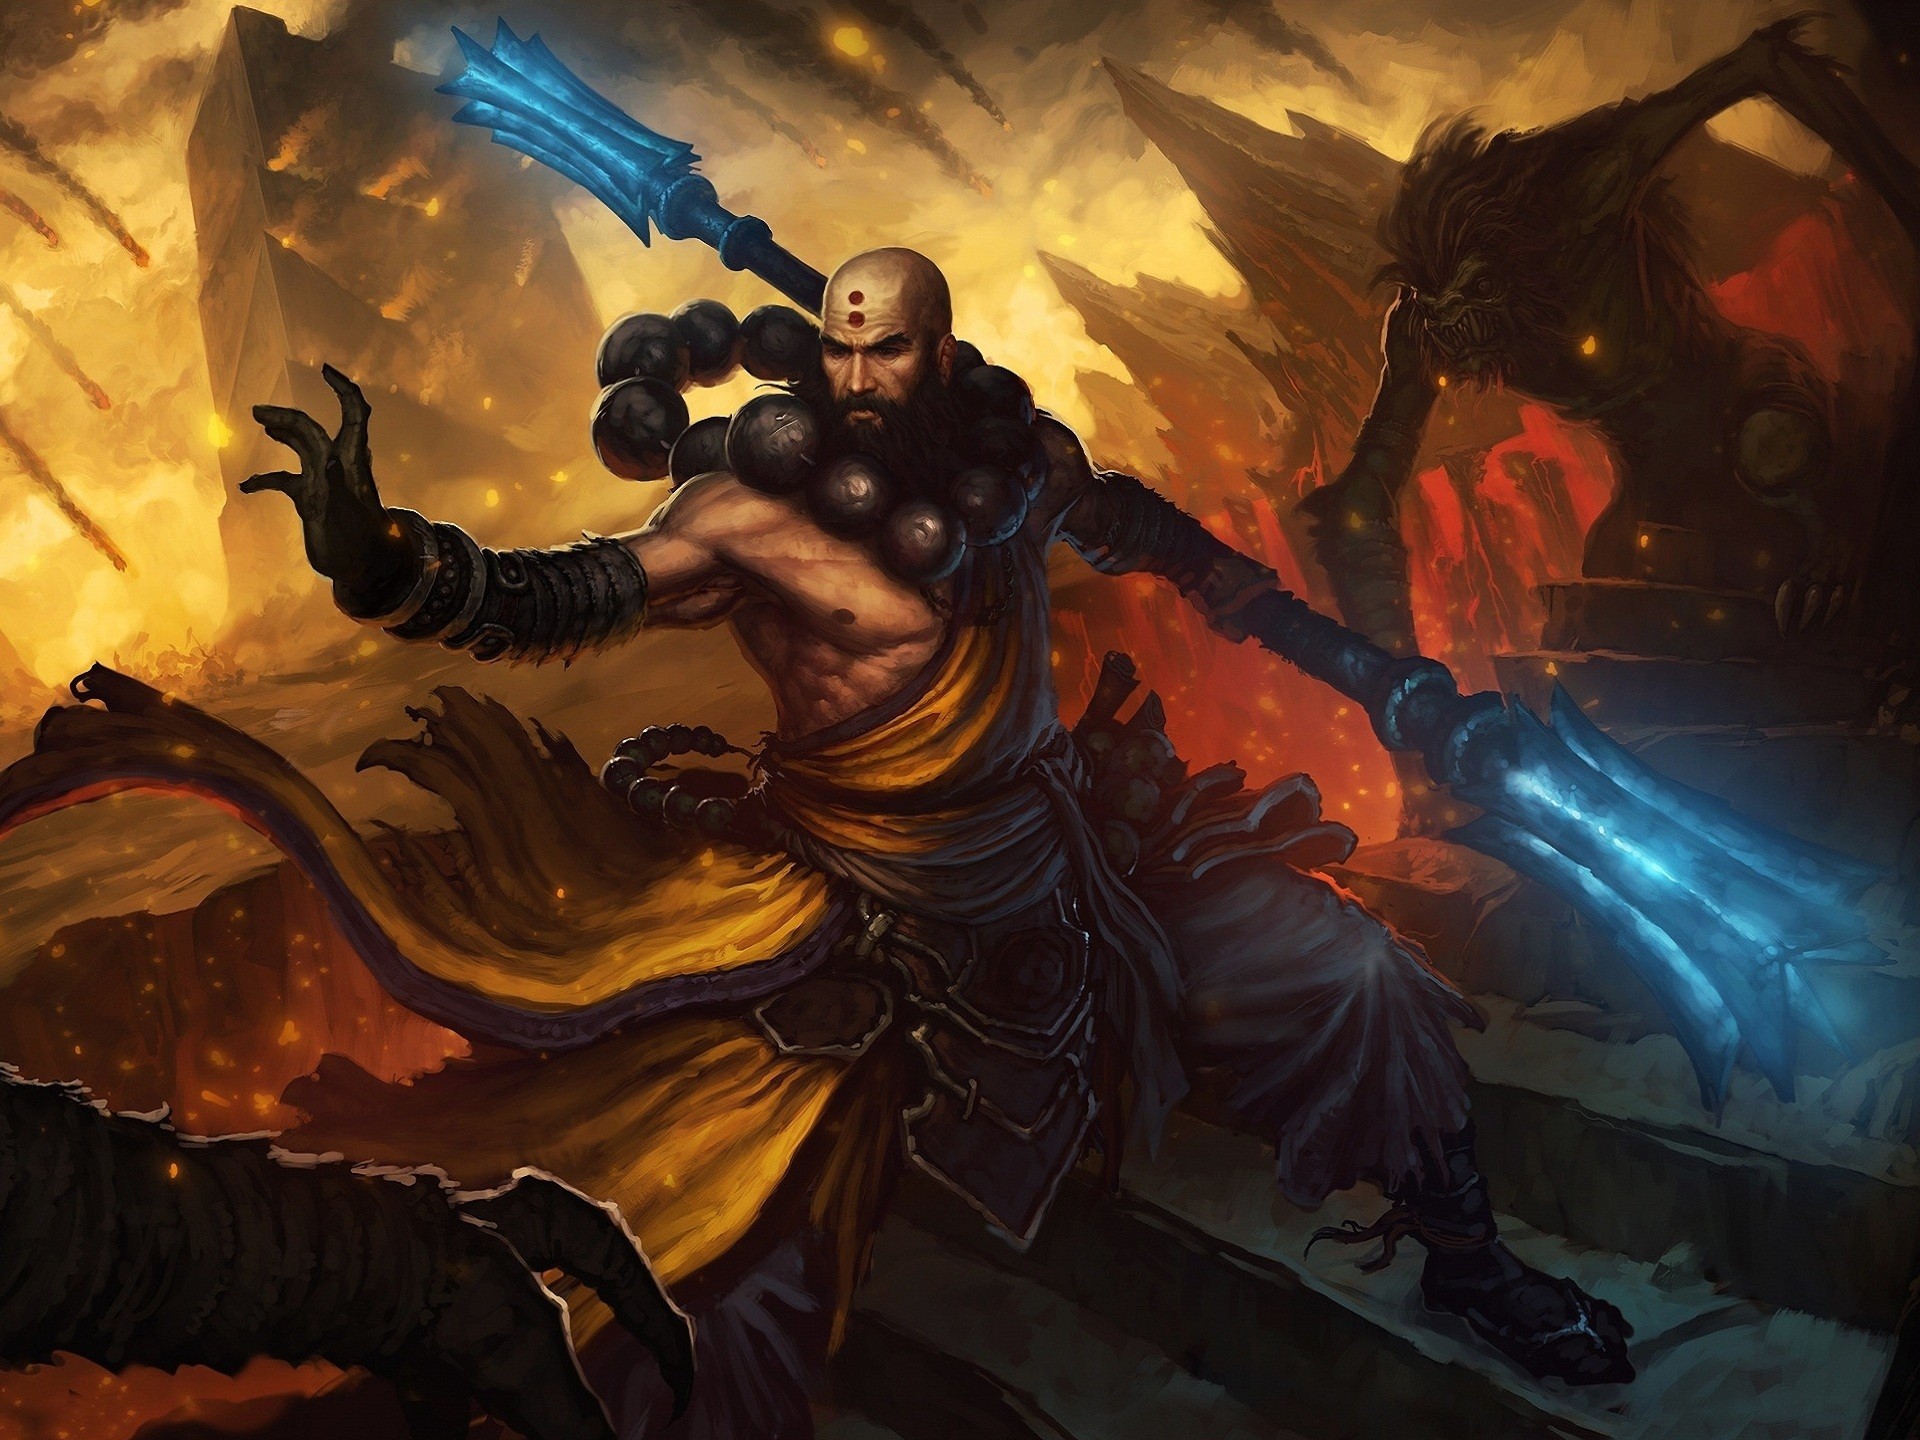 which skill does the monk use in diablo 3